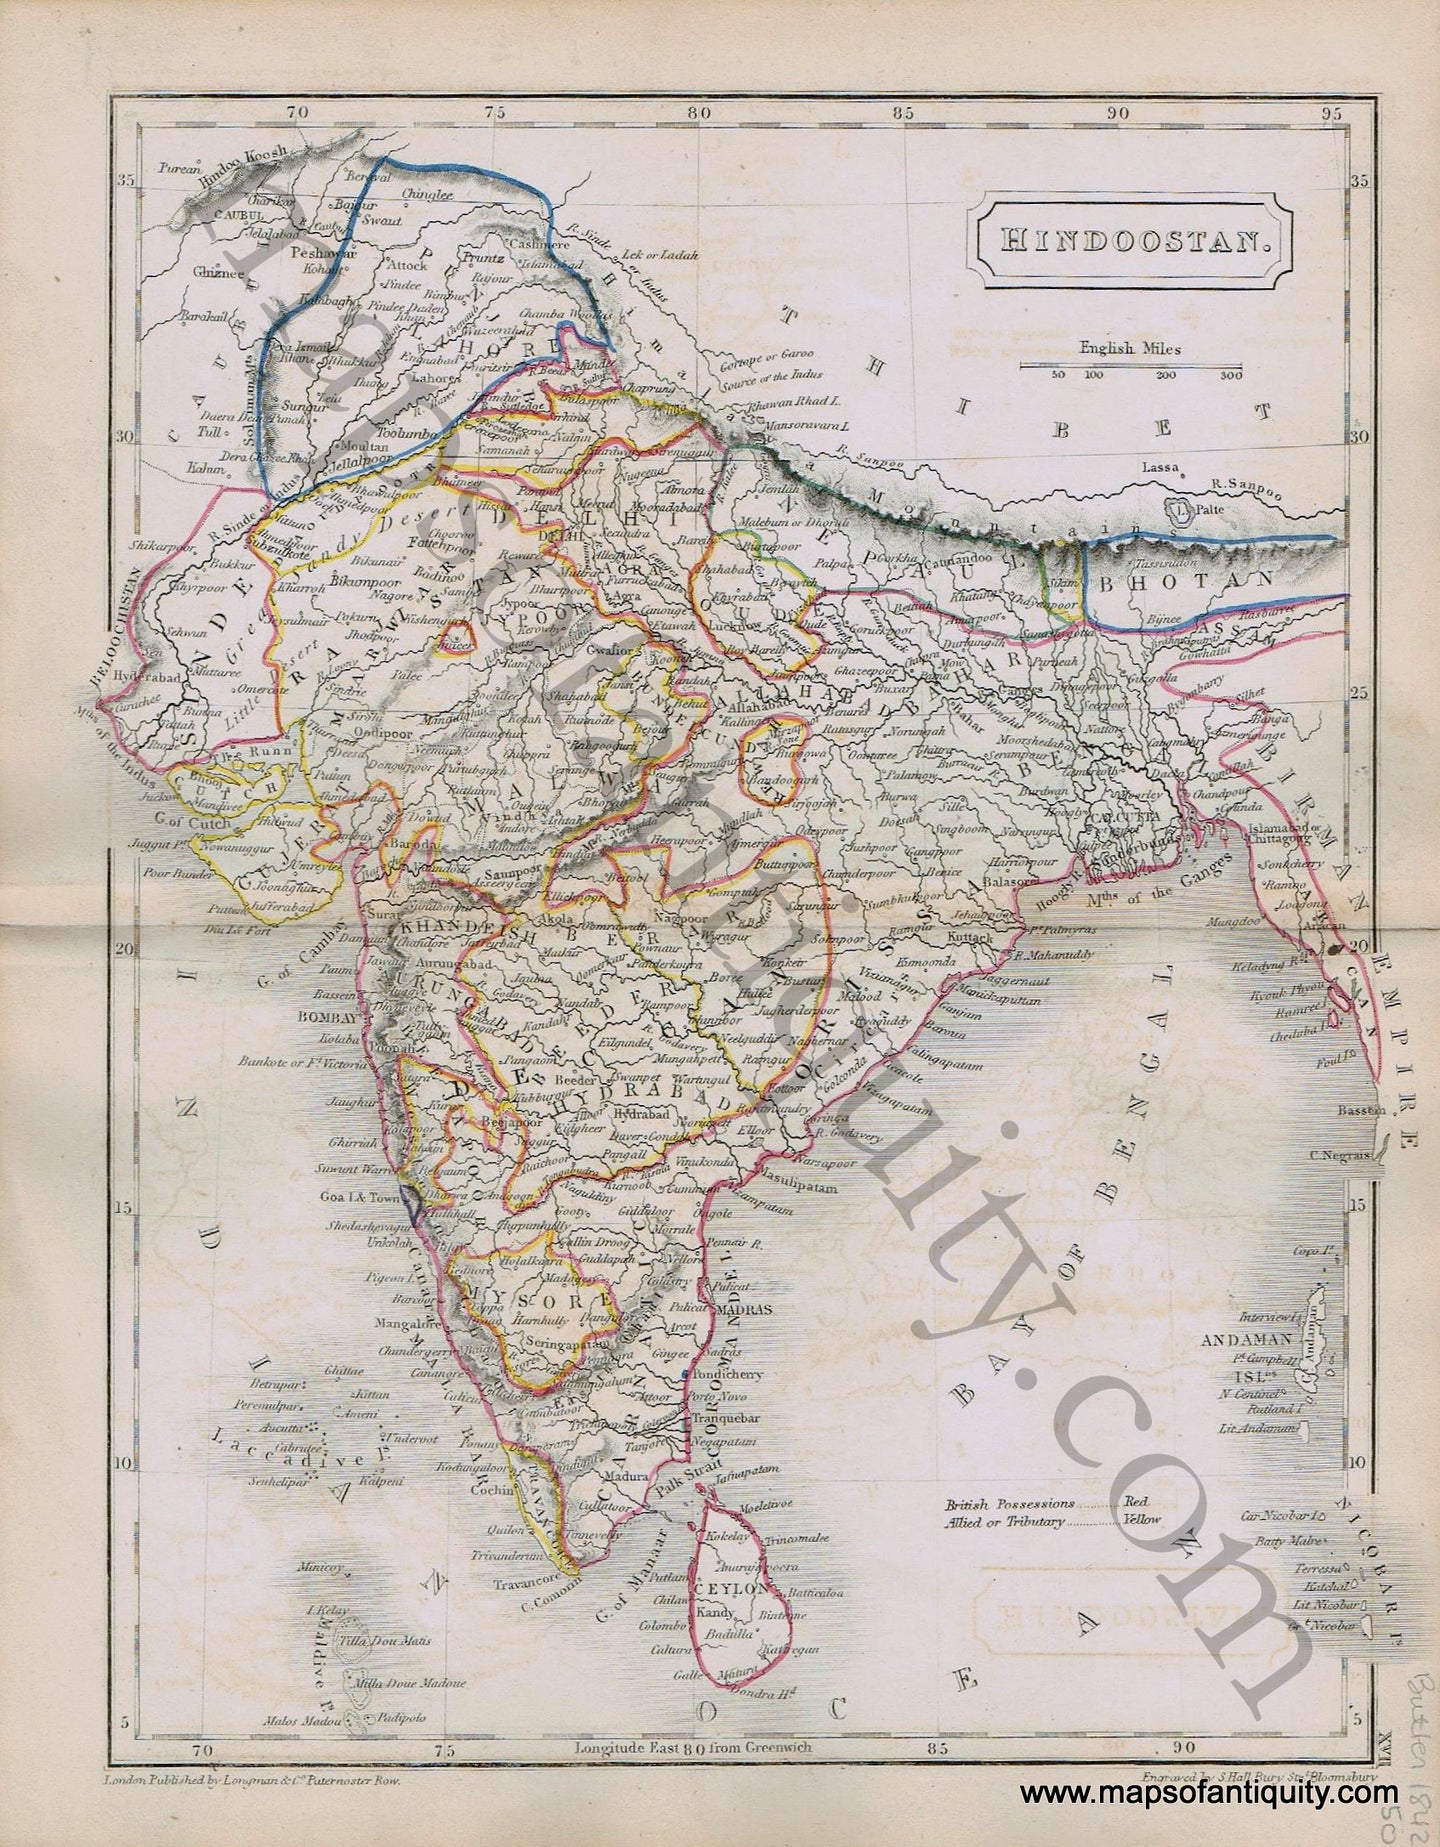 Antique-Hand-Colored-Map-Hindoostan.-1842-Butler-India-1800s-19th-century-Maps-of-Antiquity